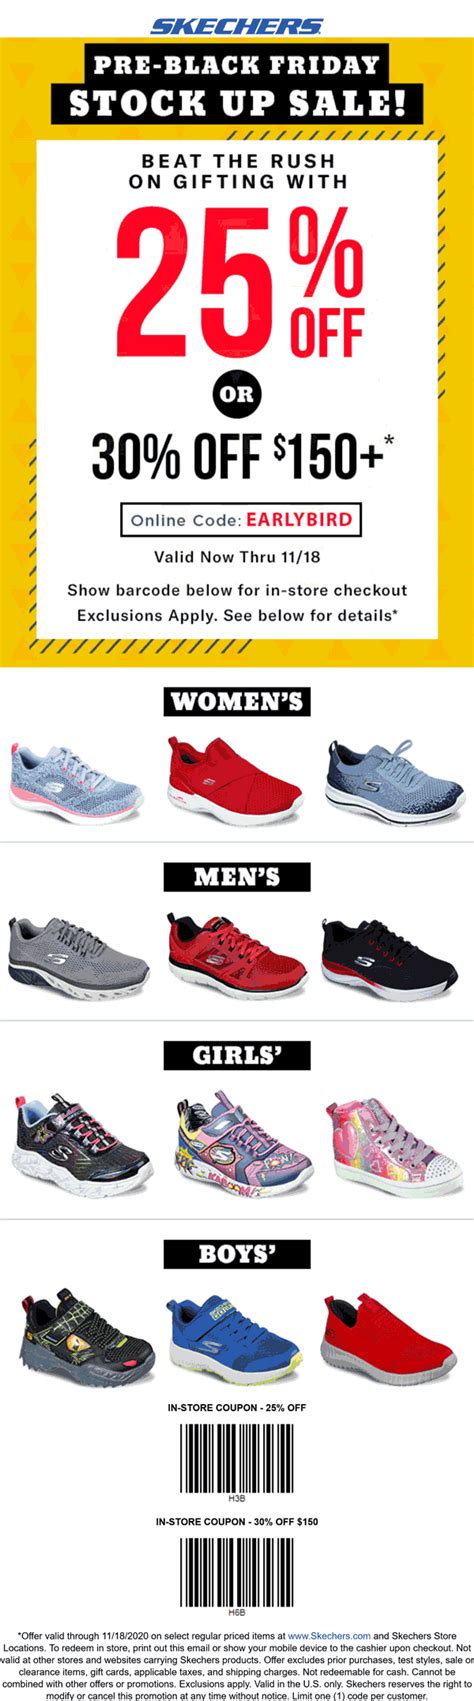 Saving Money On Your Next Shoe Purchase With Shoes.com Coupon